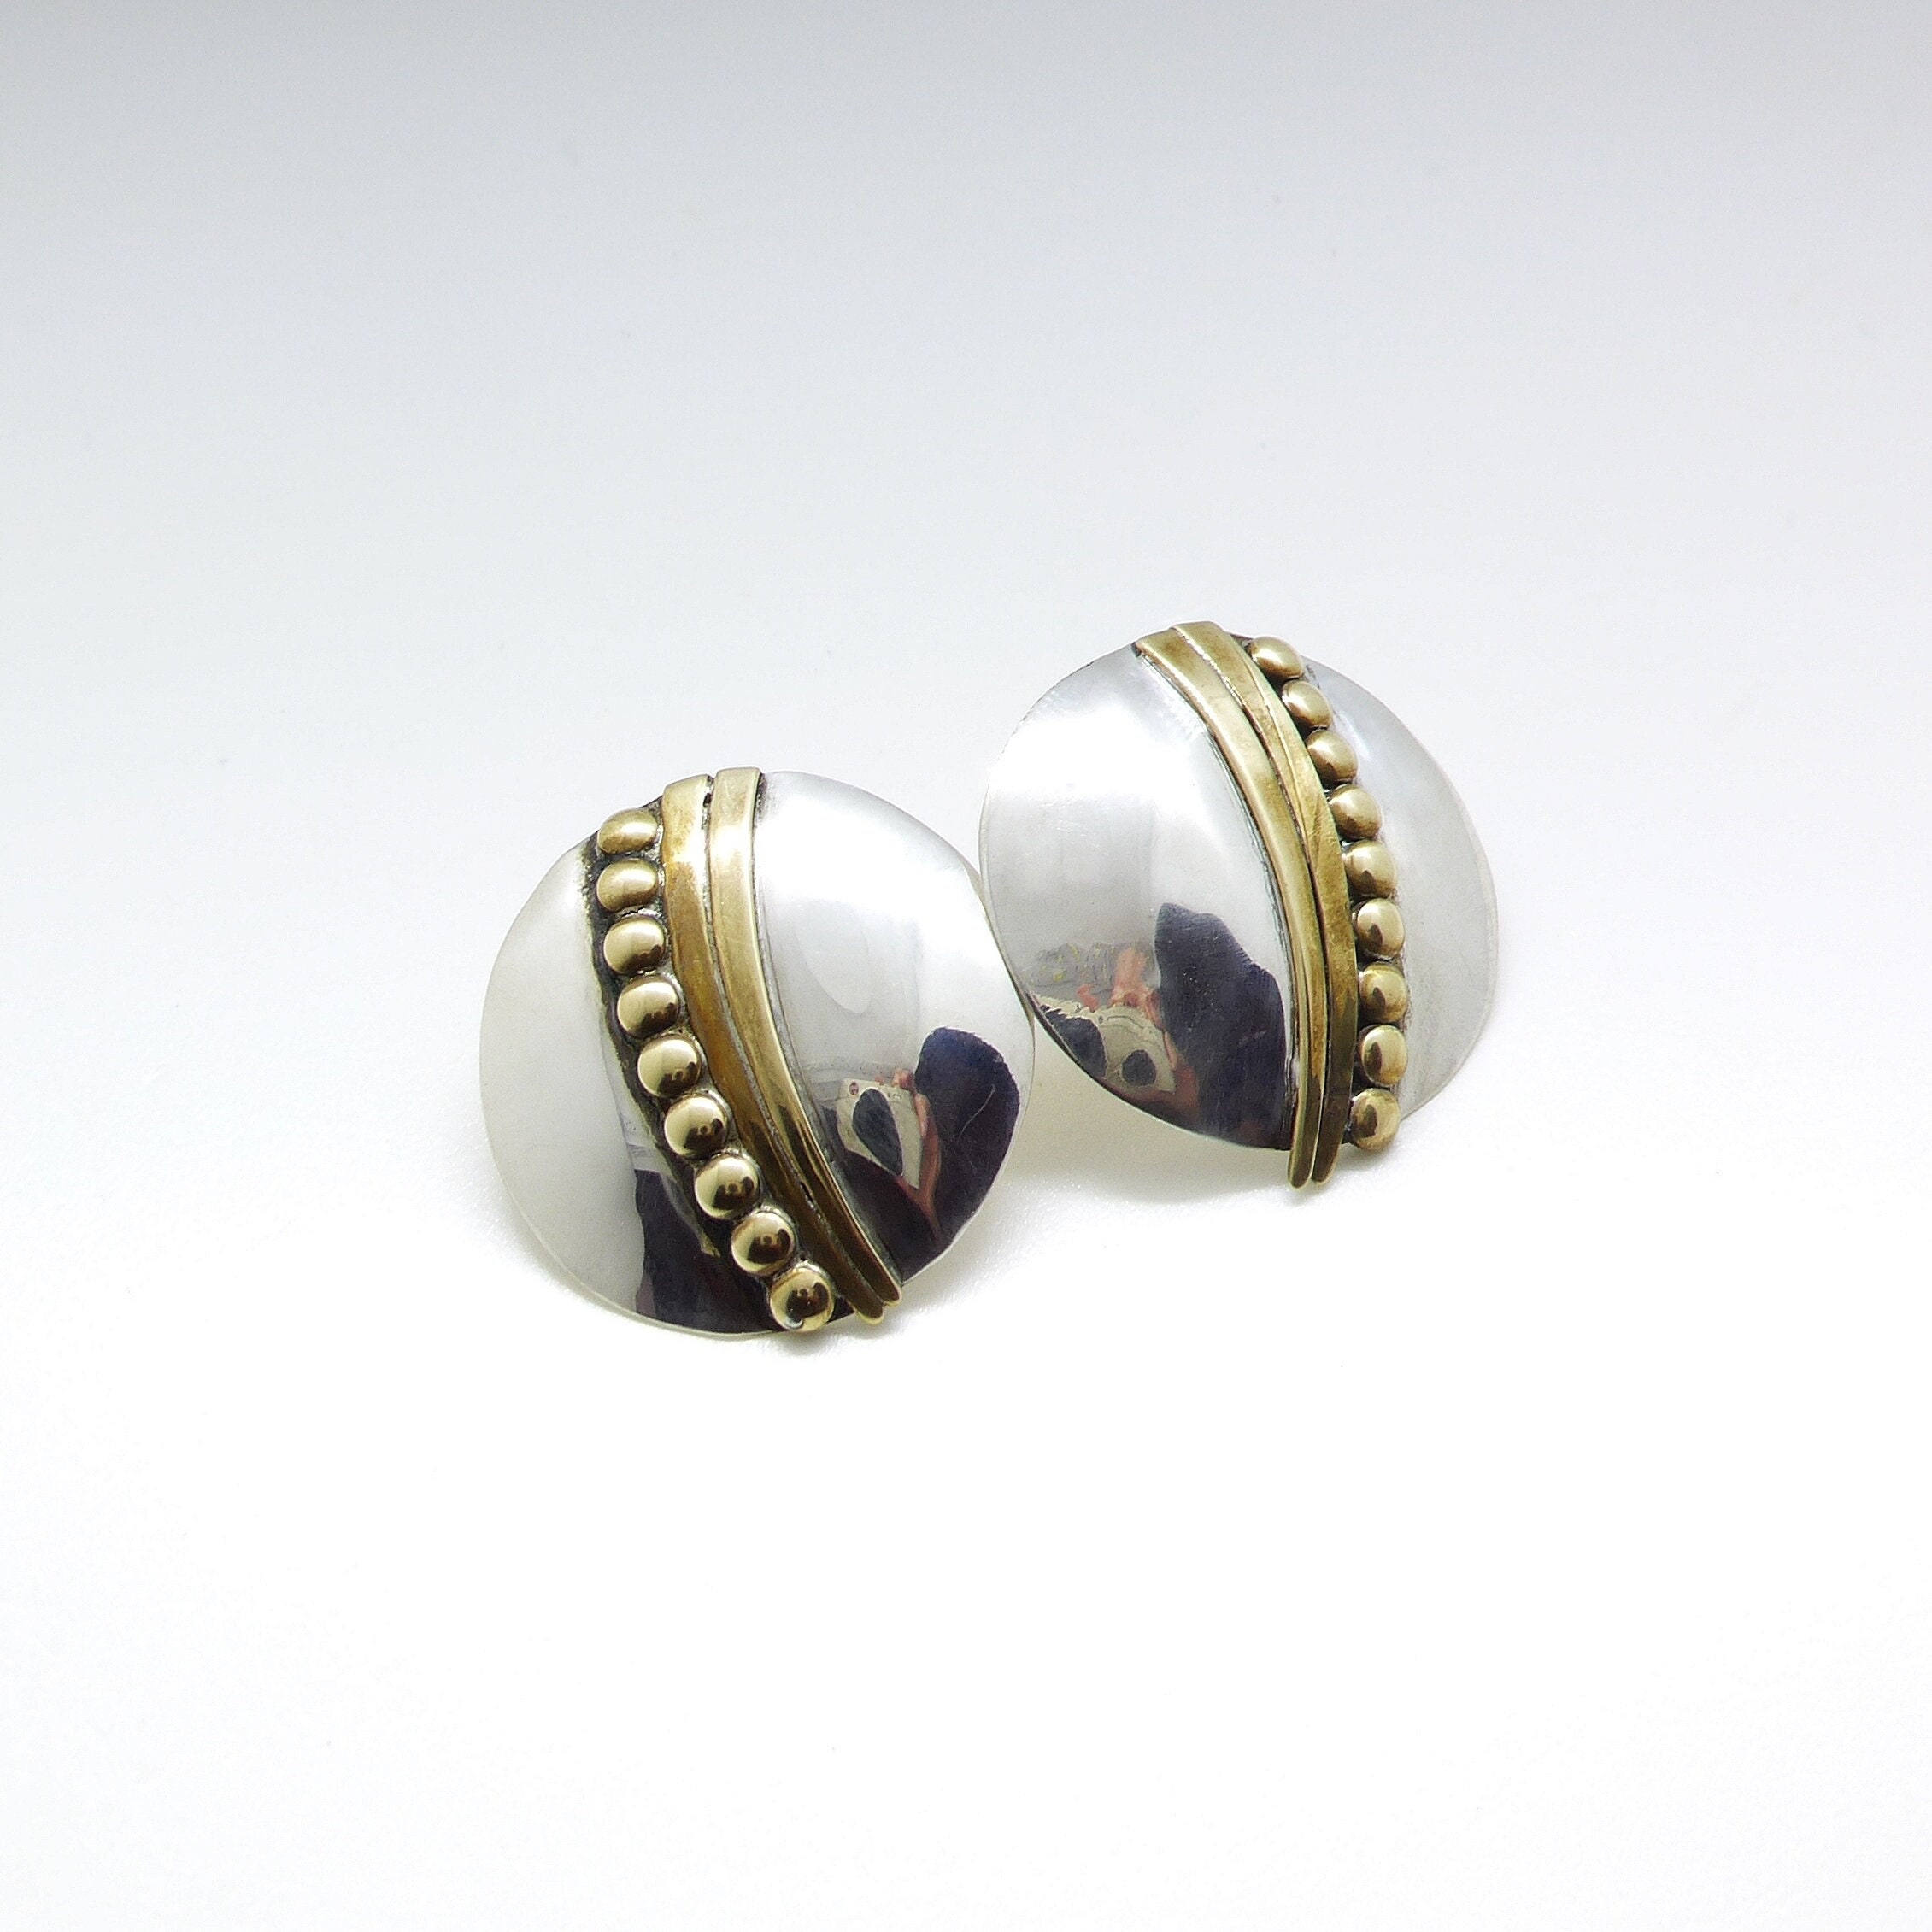 VINTAGE LOUIS BOOTH EARRINGS-HANDMADE STERLING SILVER AND BRASS-MODERNIST  DESIGN